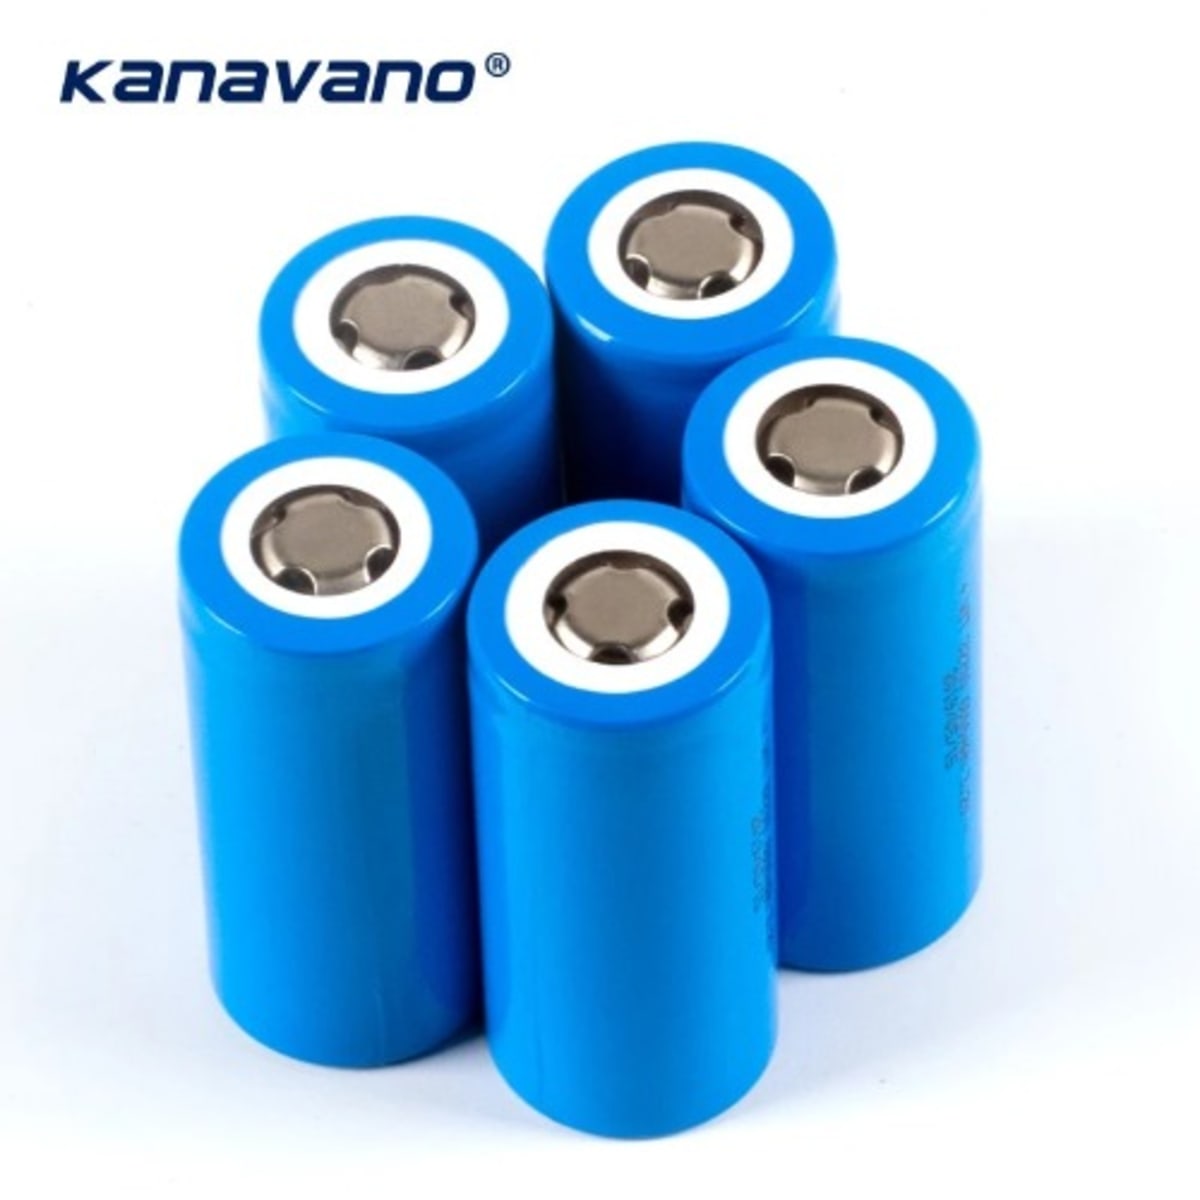 Lifepo4 Rechargeable Battery For Led Flashlights Emergency Lights- 5 Pieces  - 32700 3.2v - 6000mAh